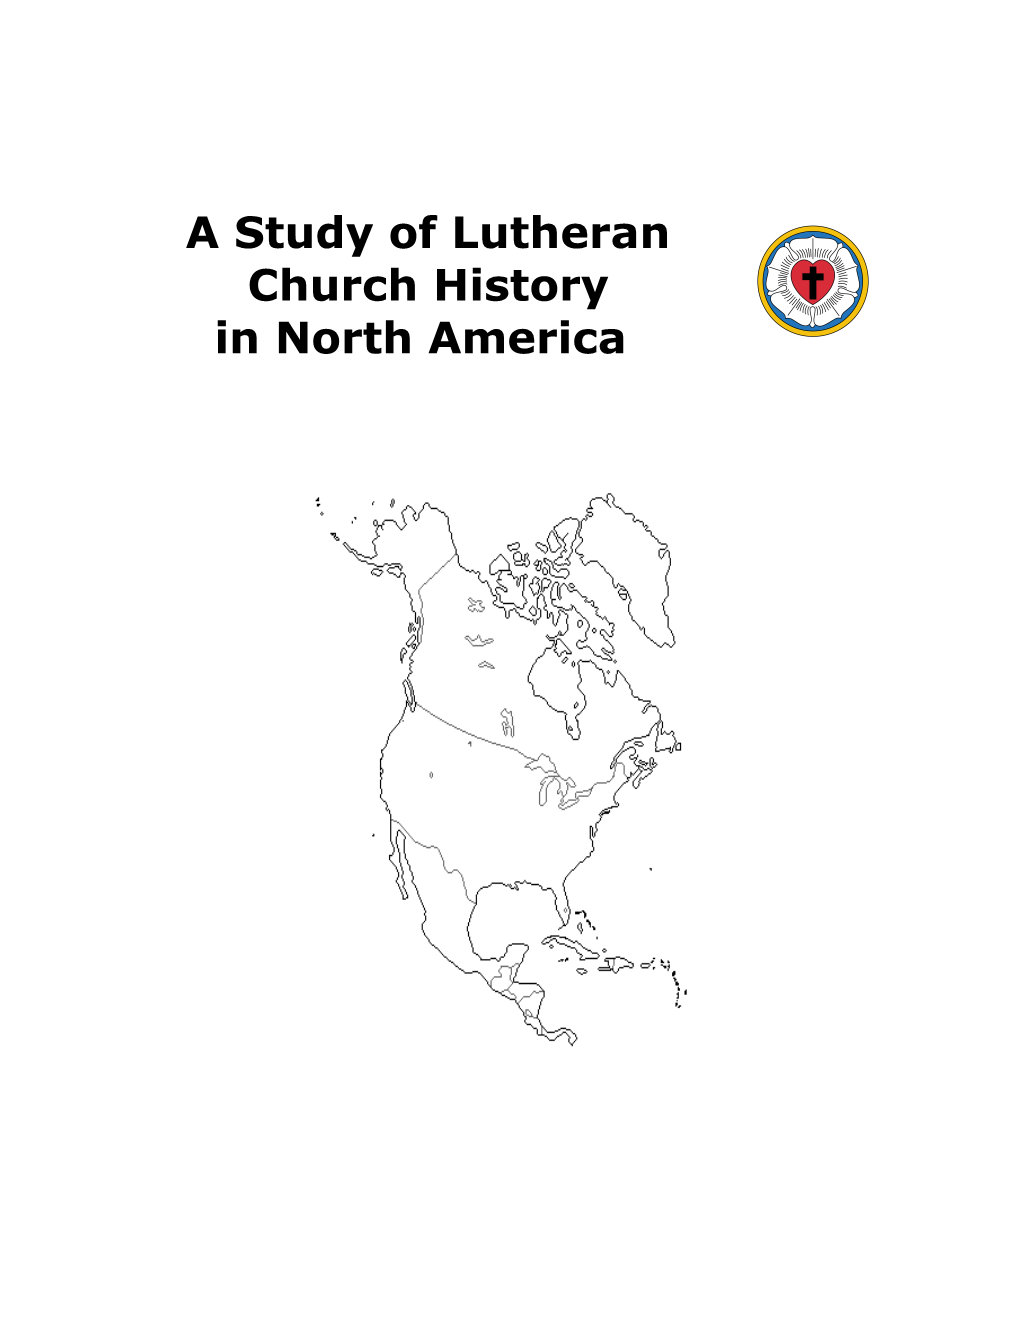 A Study of Lutheran Church History